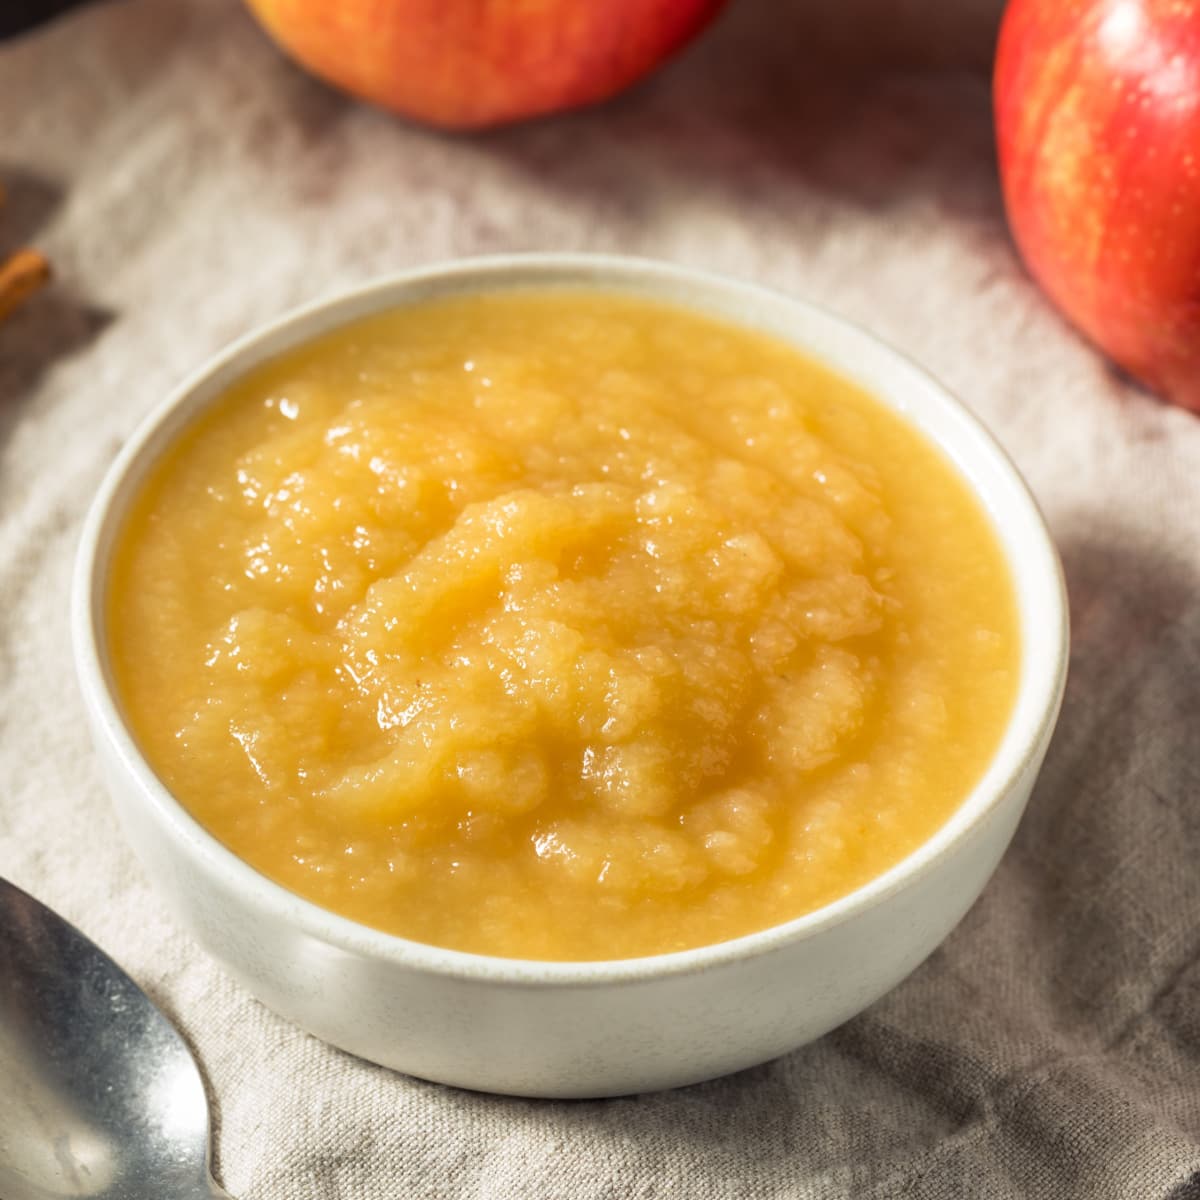 Bowl of Applesauce and Fresh Apples on a Rustic Cloth